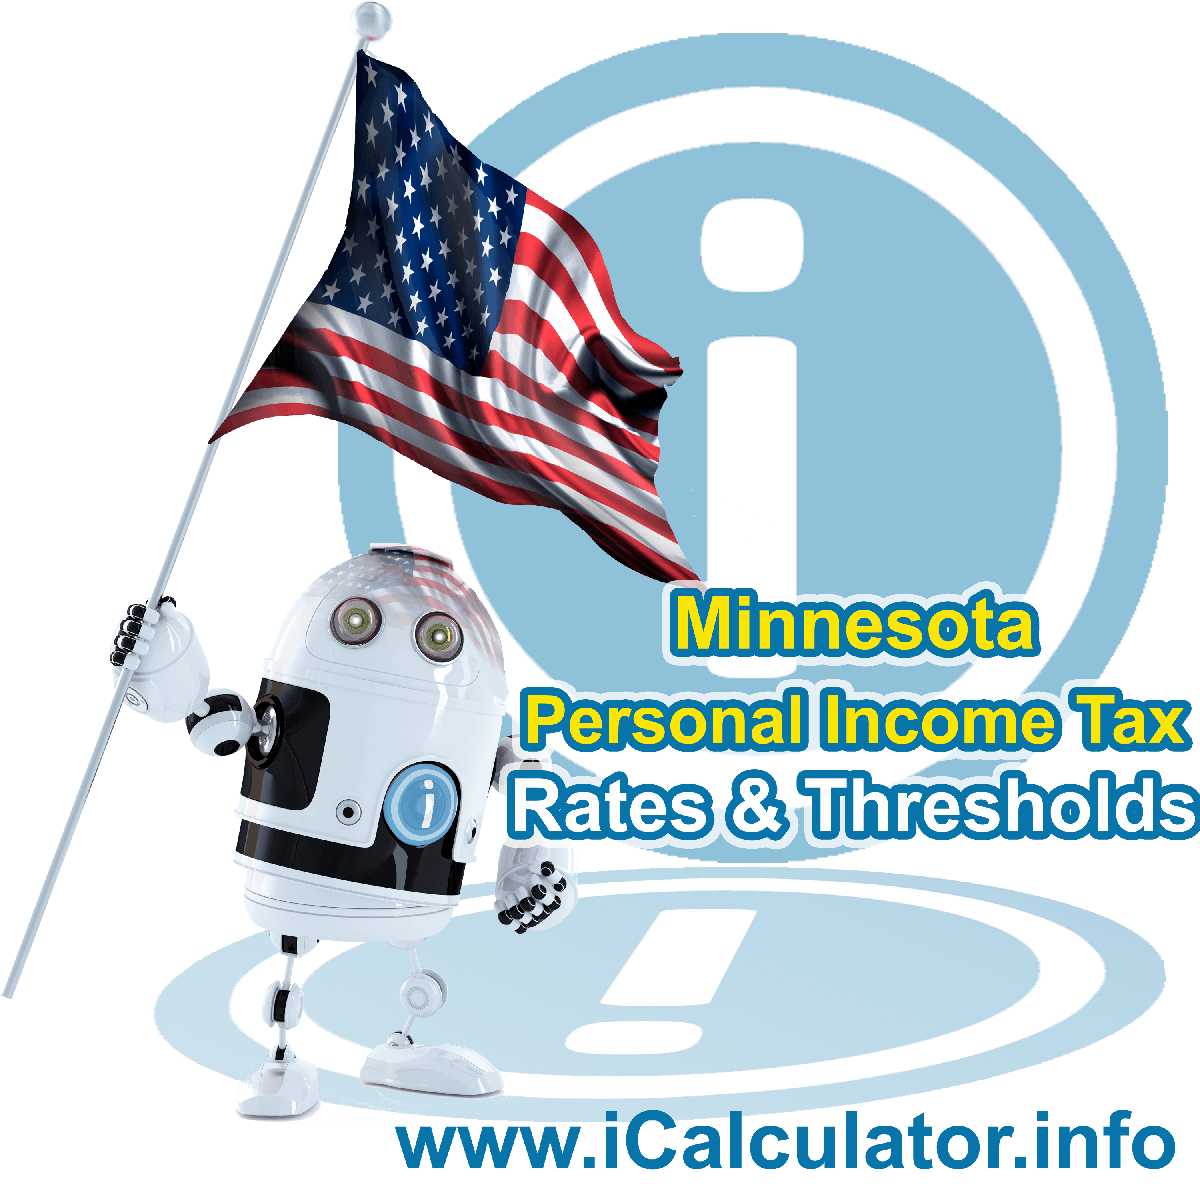 Minnesota State Tax Tables 2022. This image displays details of the Minnesota State Tax Tables for the 2022 tax return year which is provided in support of the 2022 US Tax Calculator